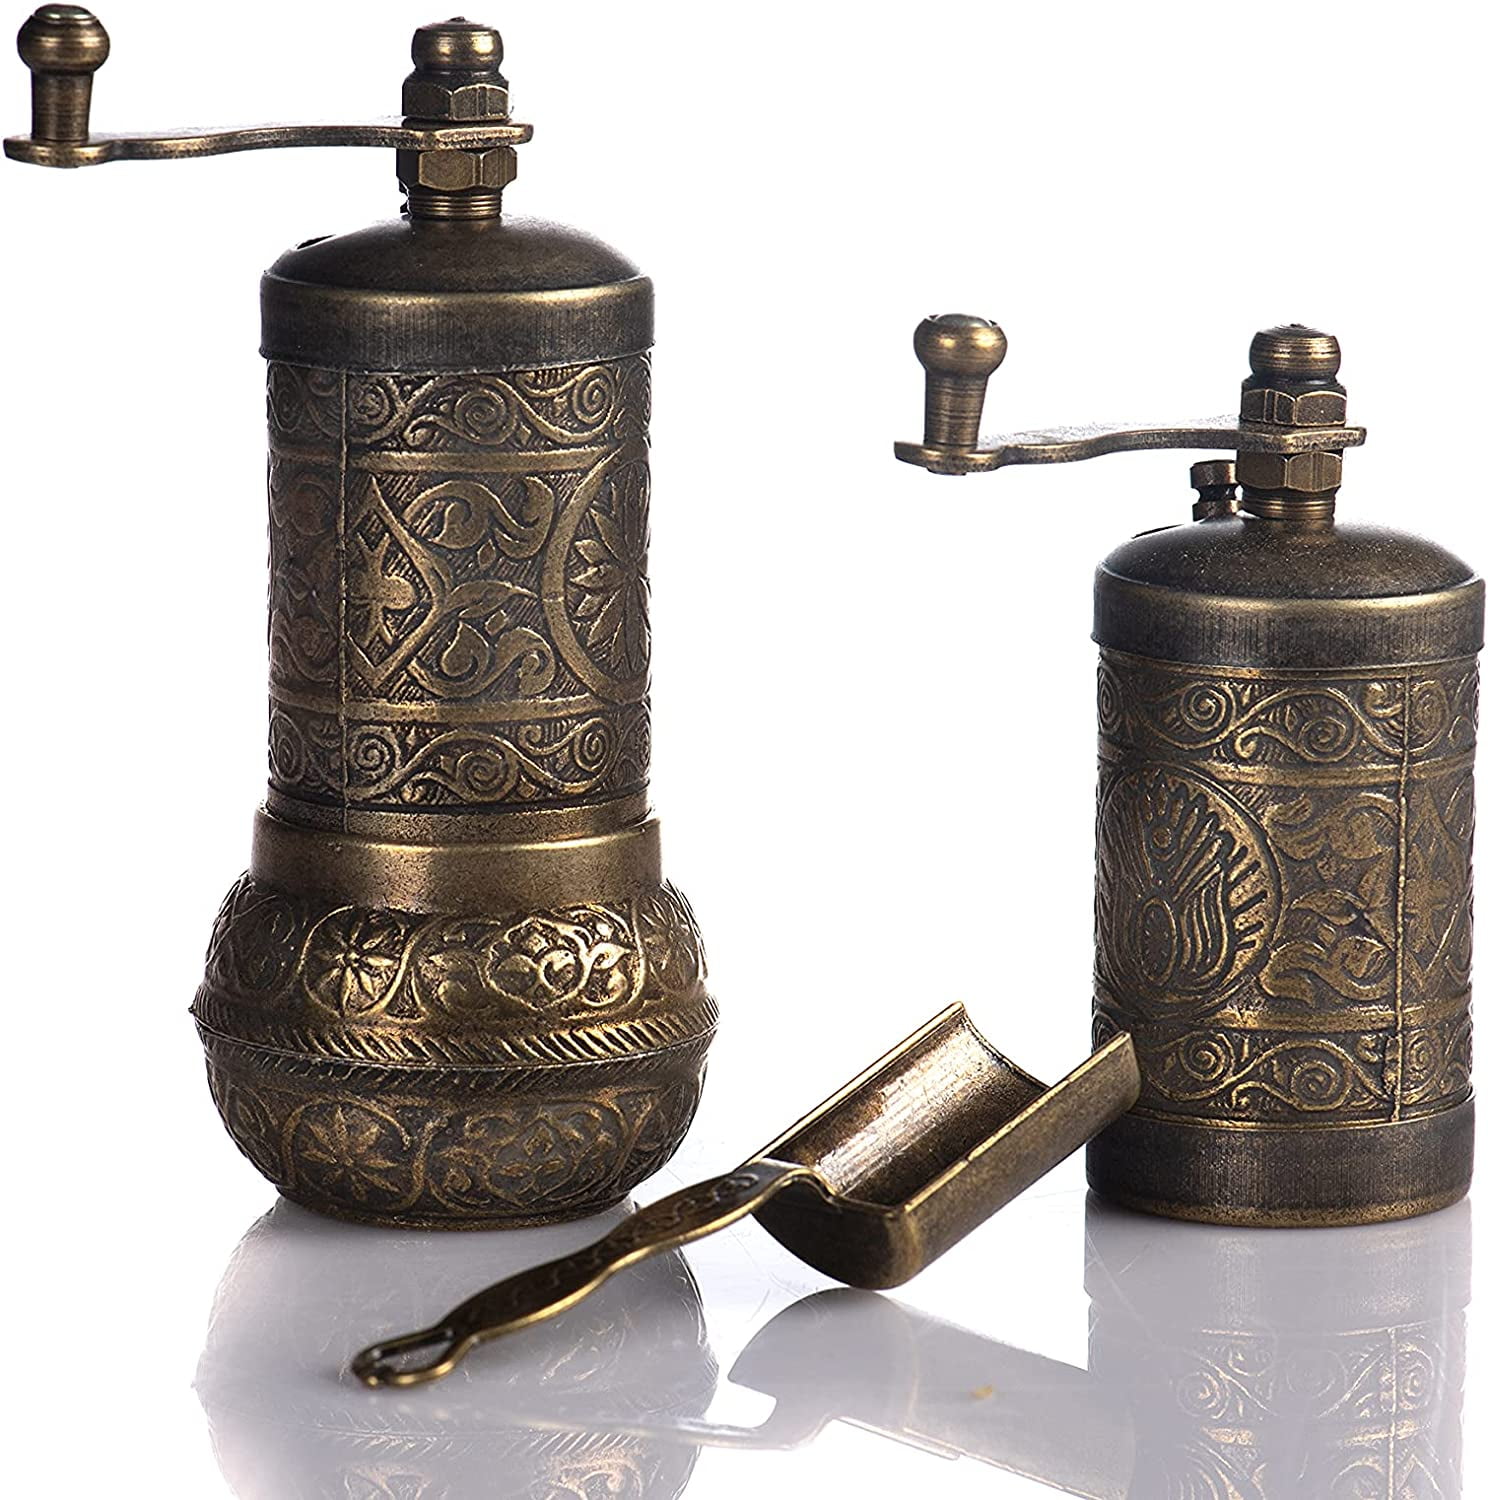 Set of 3, Traditional Turkish Coffee Grinders, Pepper Mill, Spice Grinder,  Brass Mill, Manual Coffee Grinder, Manual Pepper Grinder 